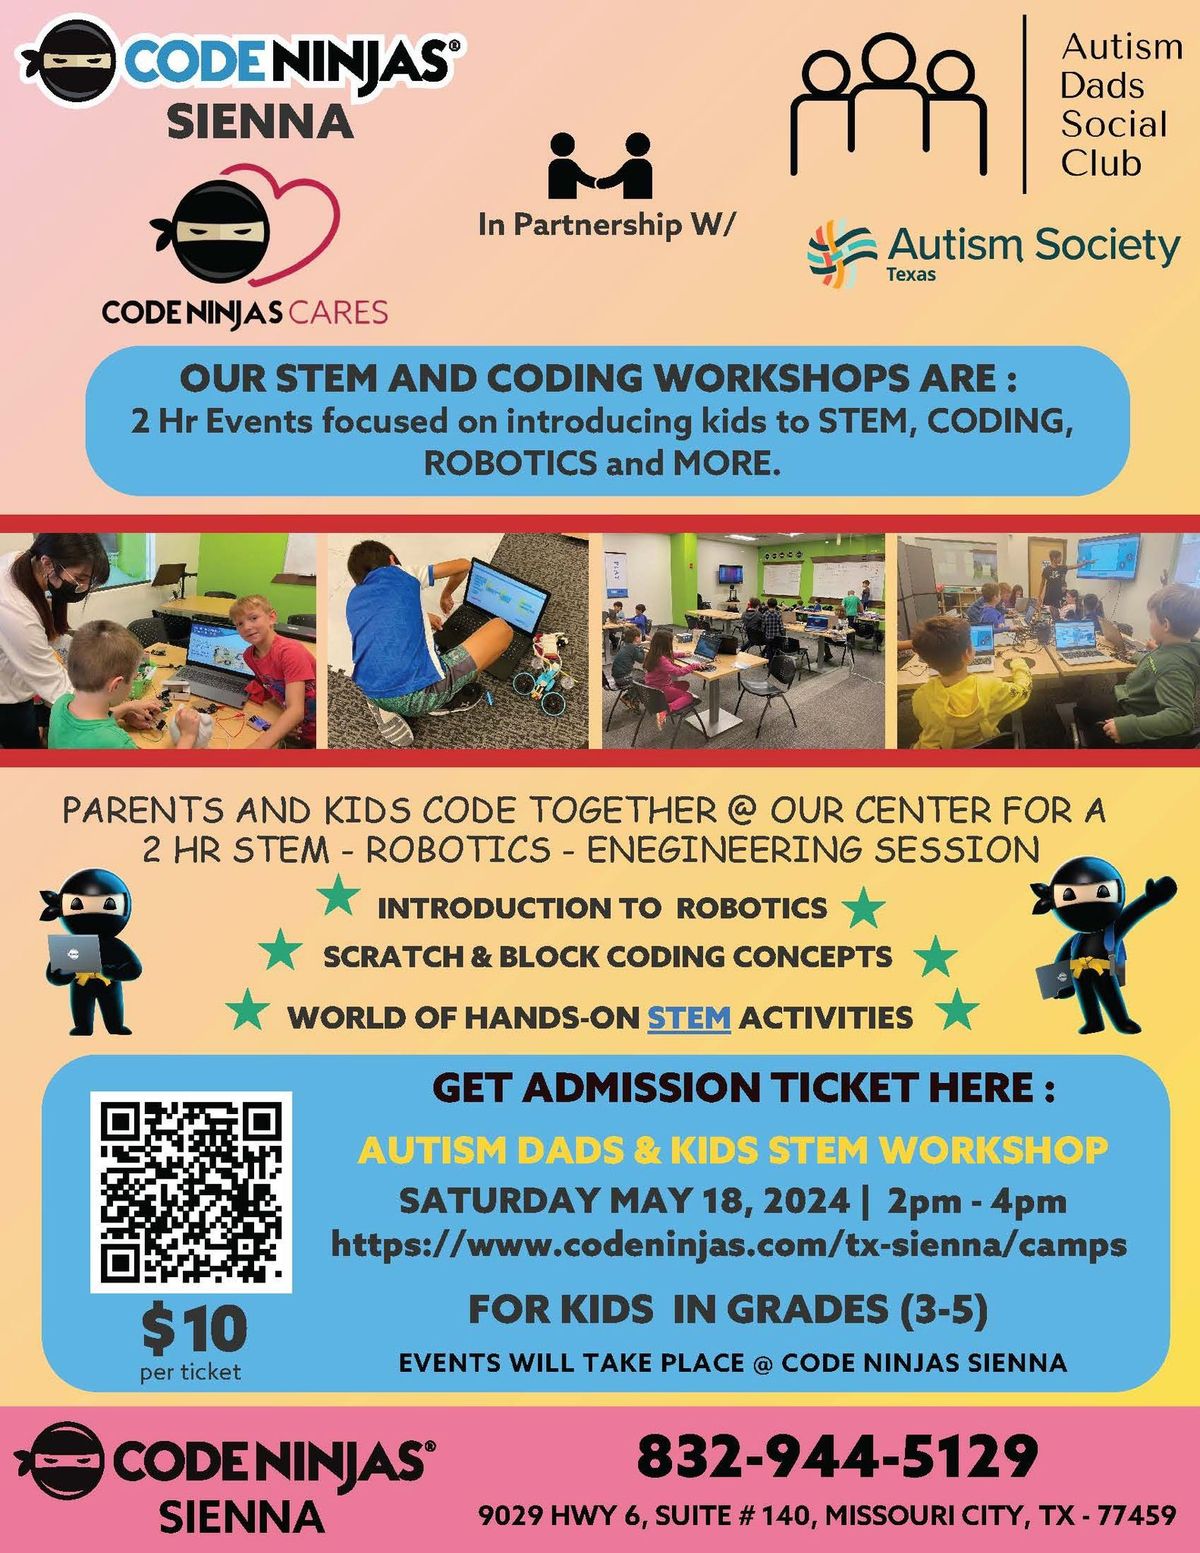 Autism Dads Social Club - STEM and Coding Workshop 